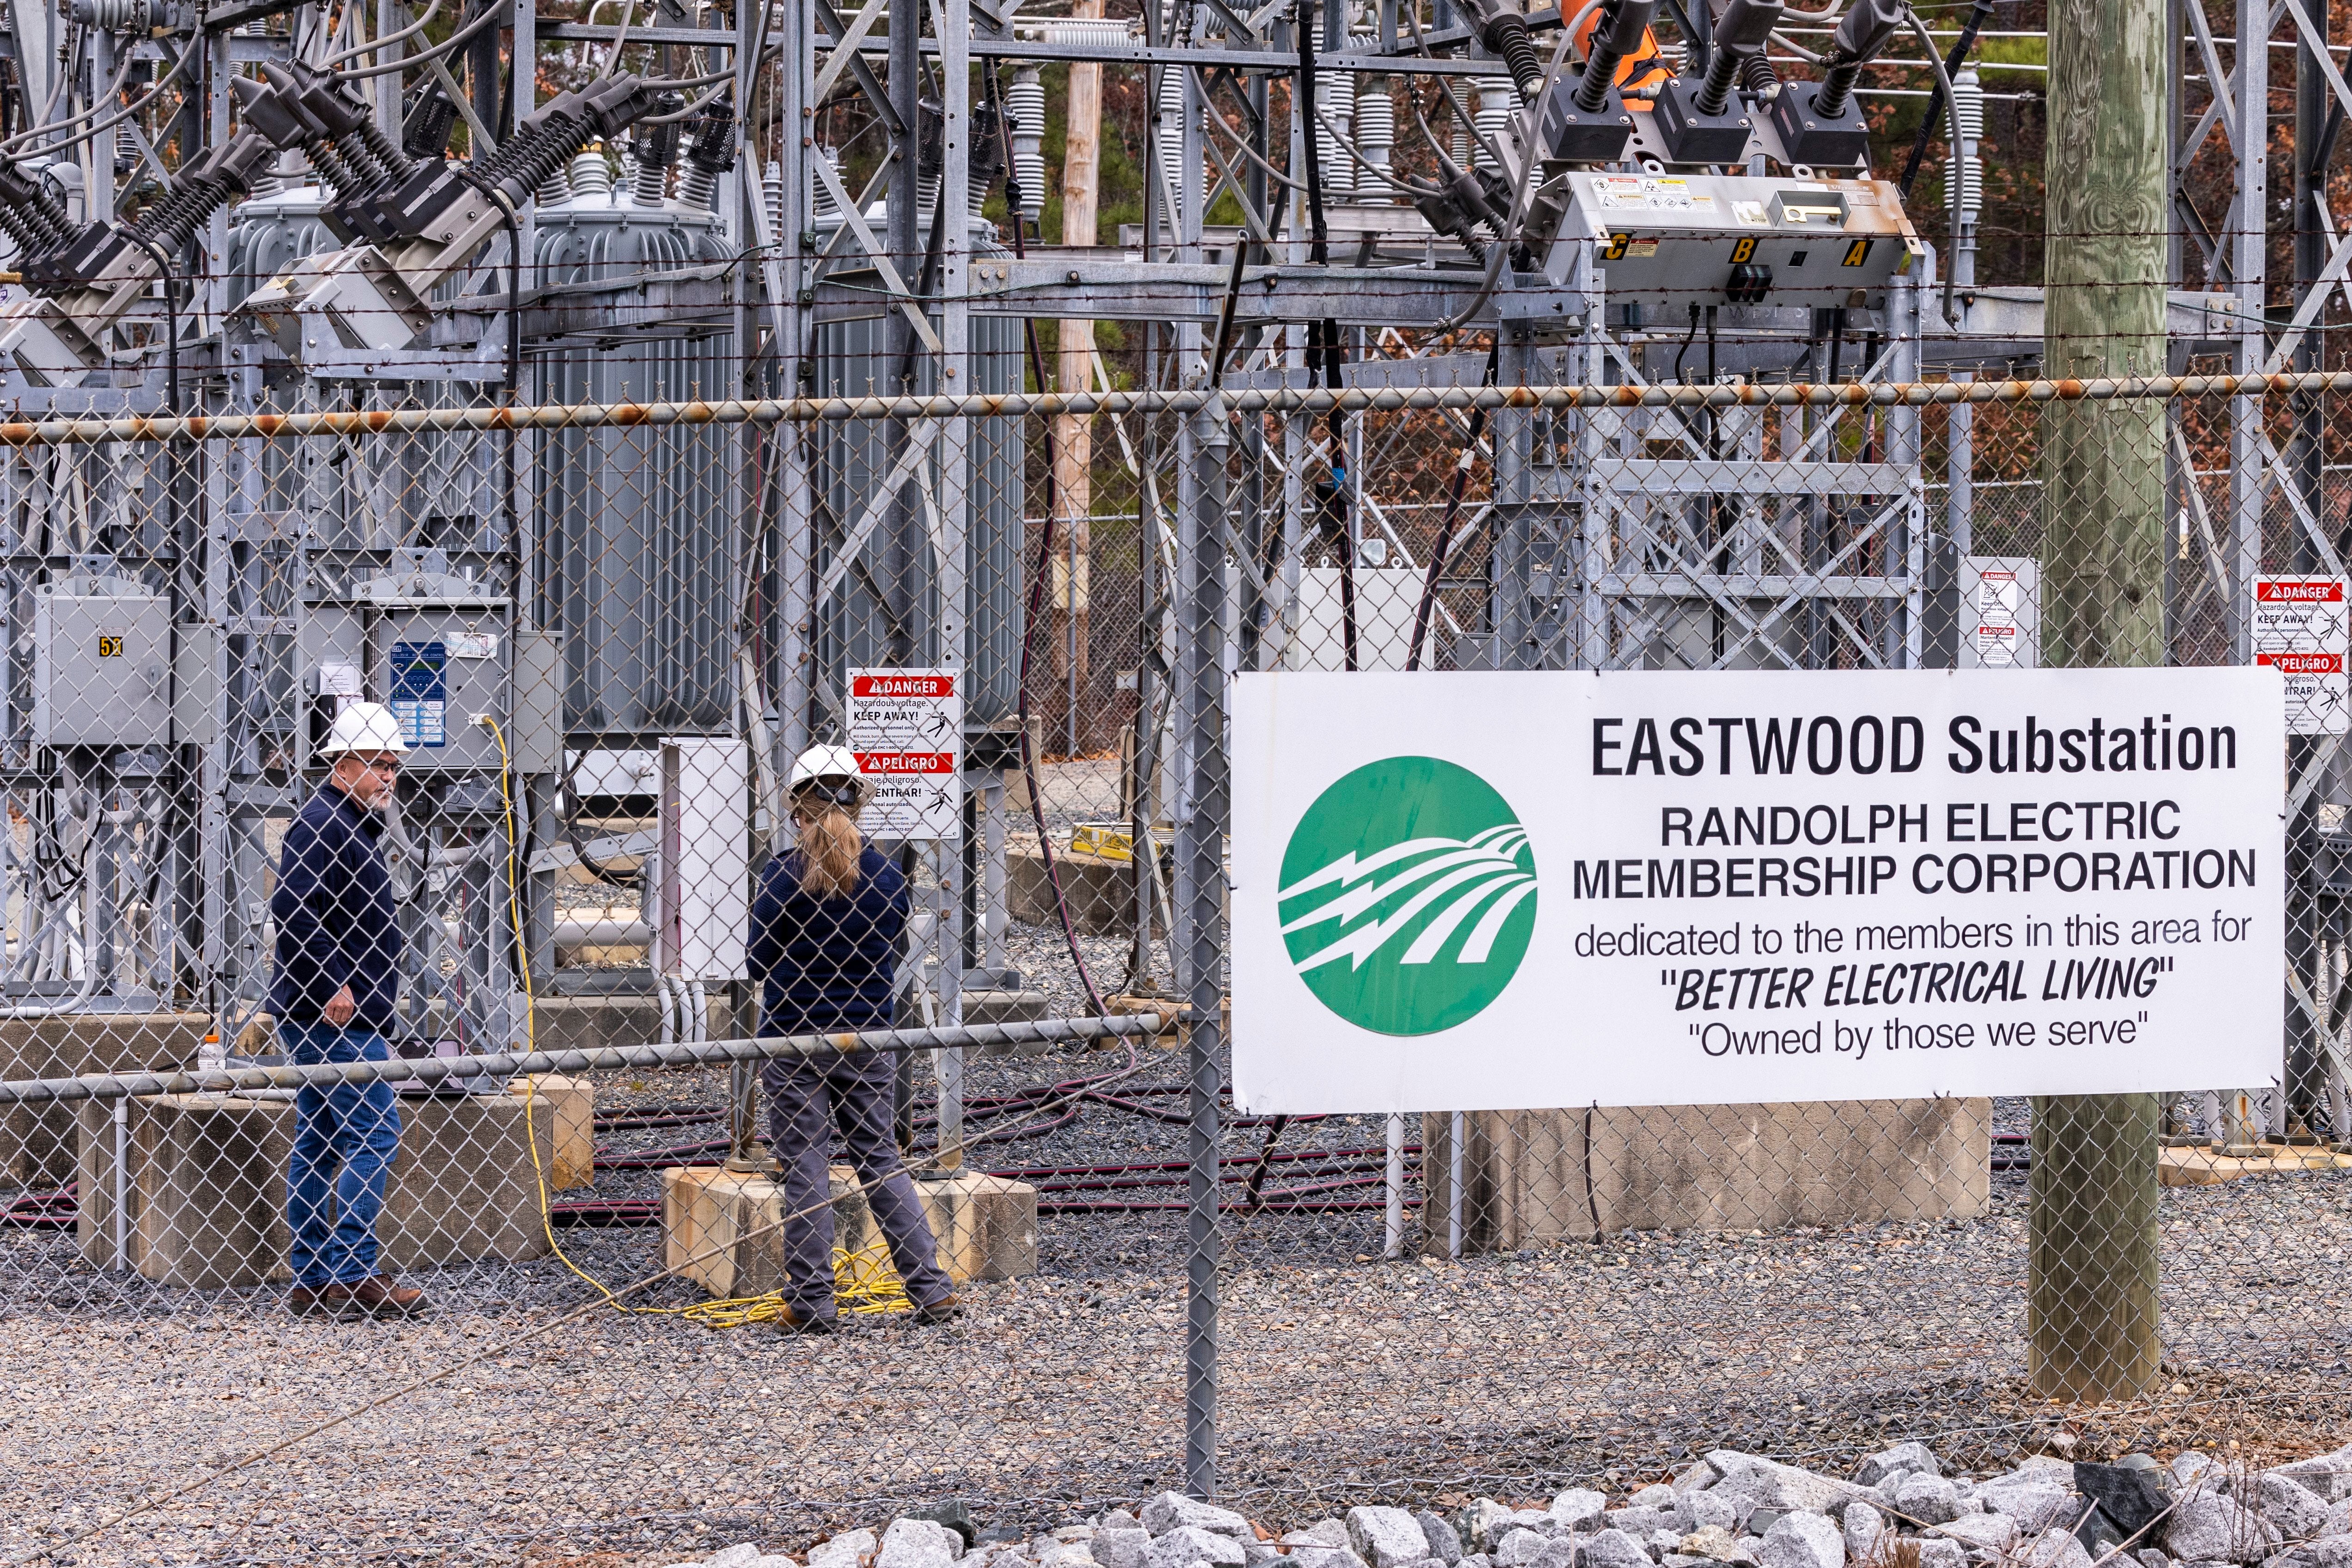 Workers repair the Eastwood Substation in West End, North Carolina, after deliberate attacks on electrical substations in Moore County last Saturday evening.